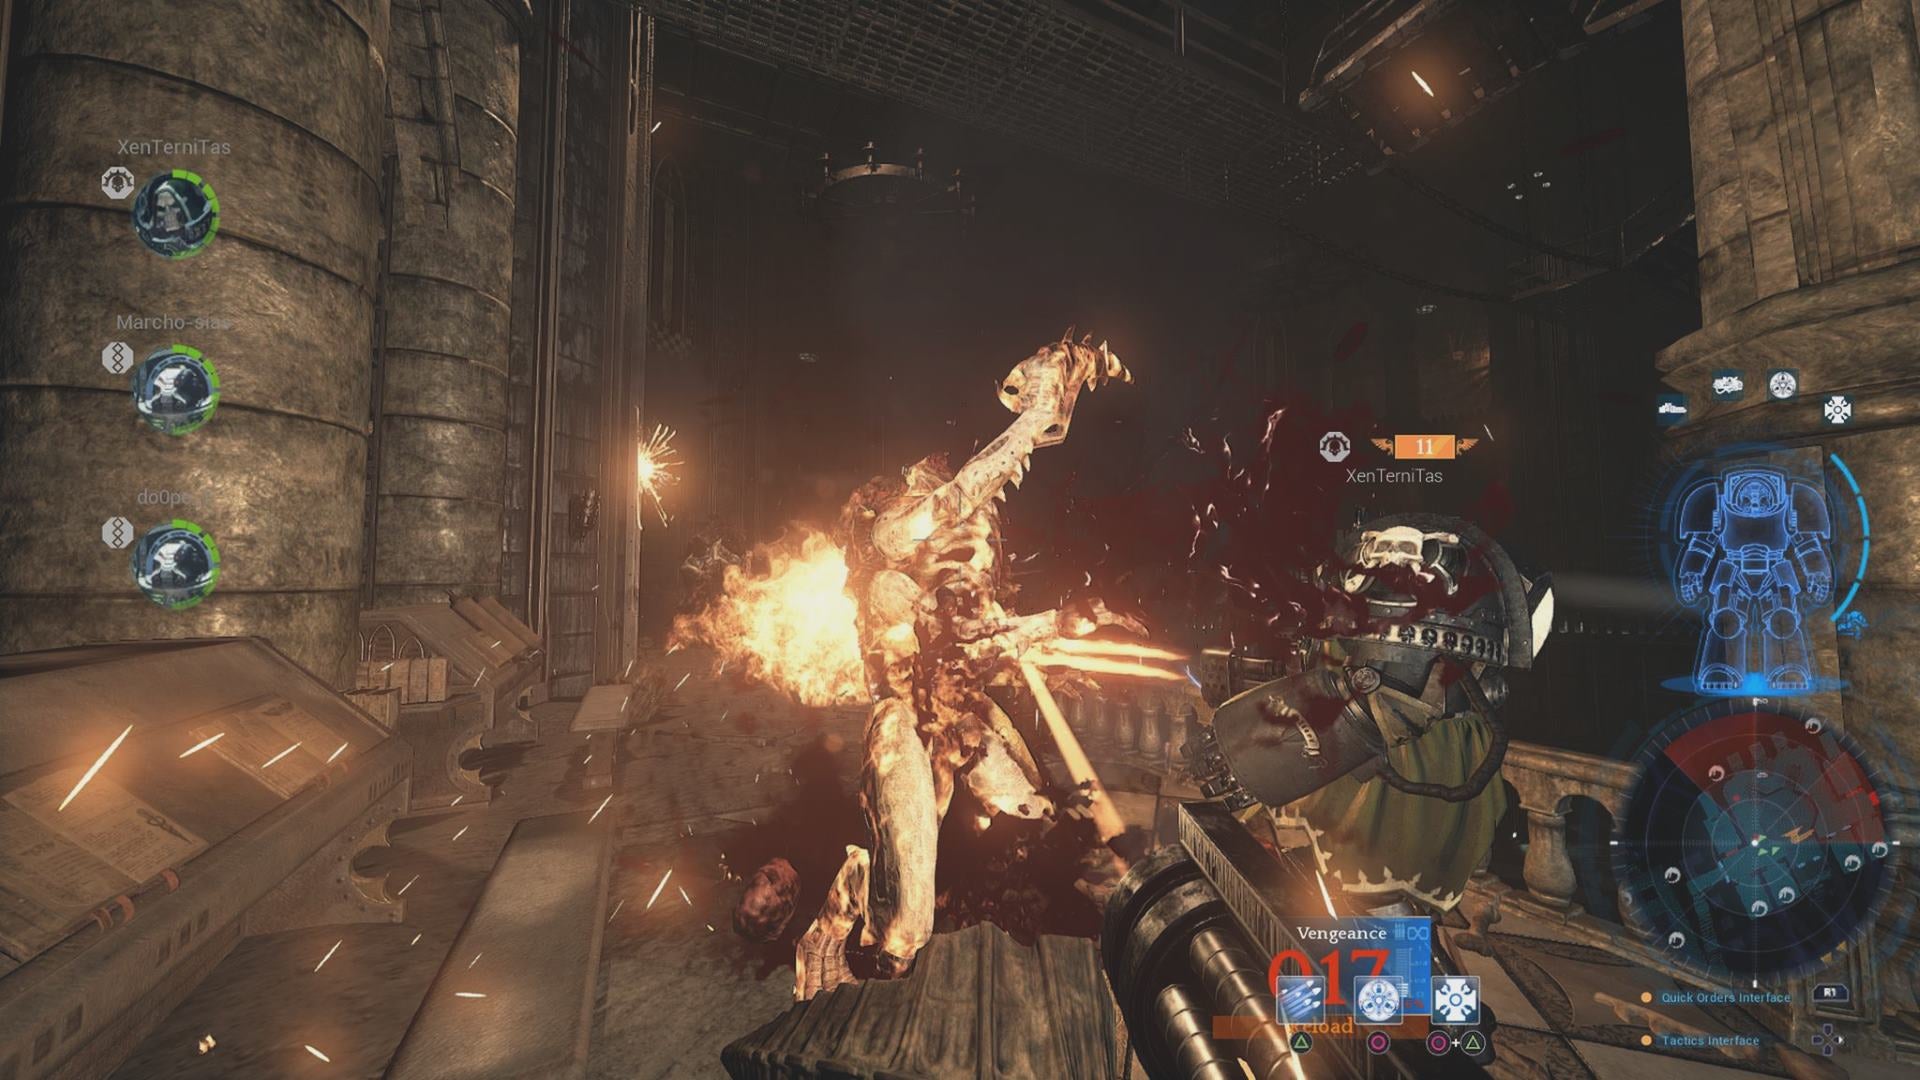 Screenshot of Space Hulk: Deathwing gameplay with action scene.